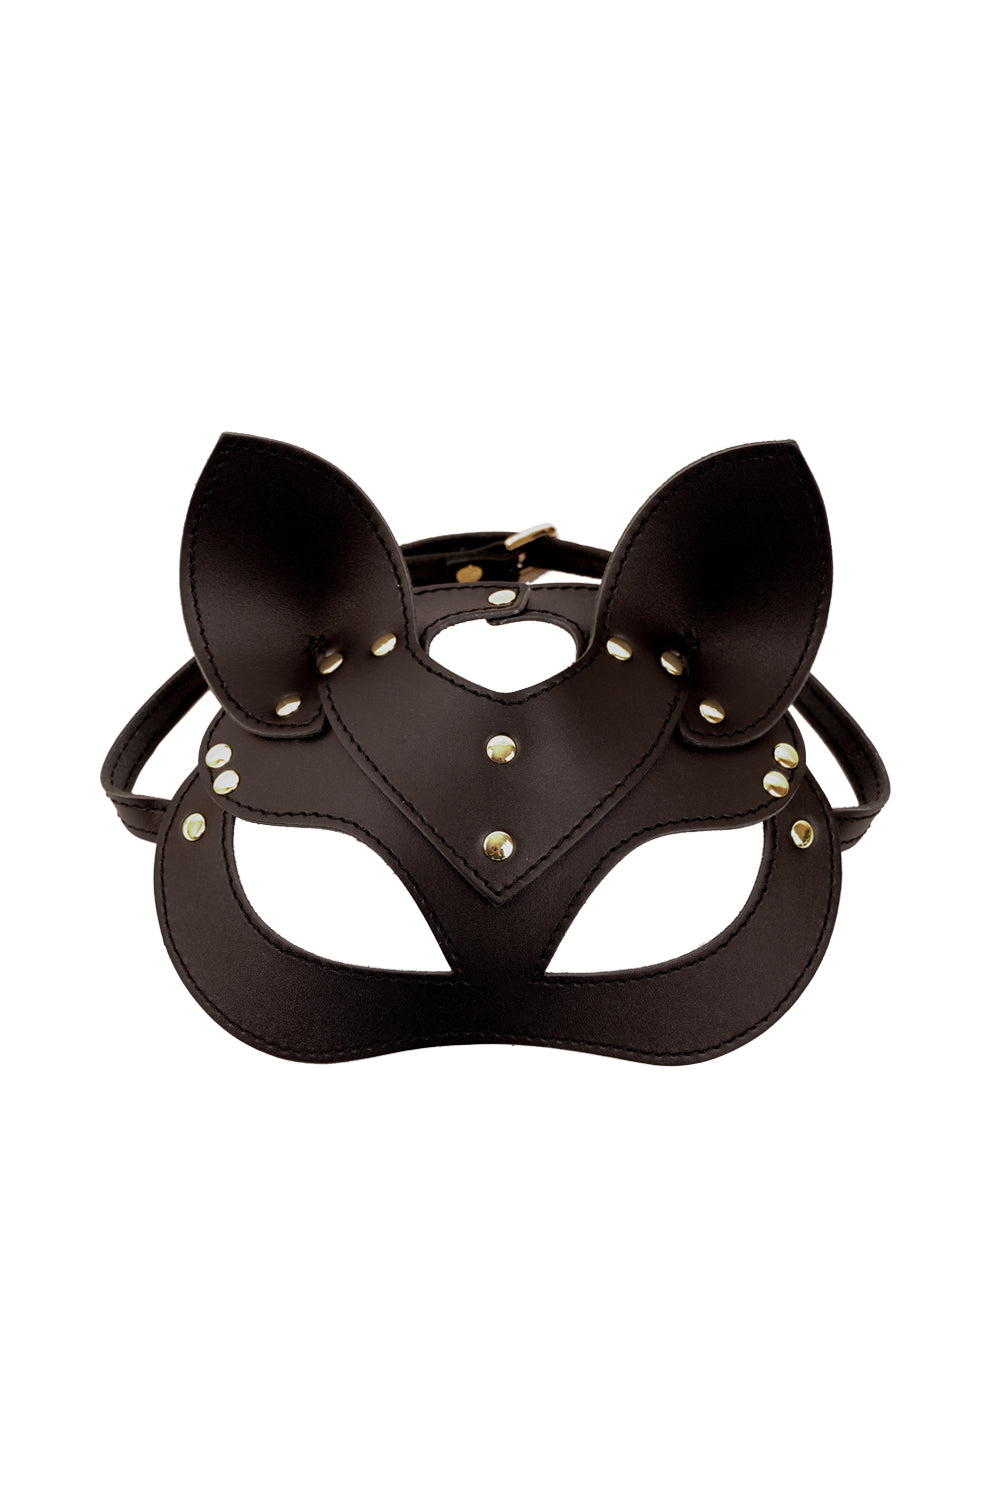 Leather сat mask, kitty fetish mask. Pink